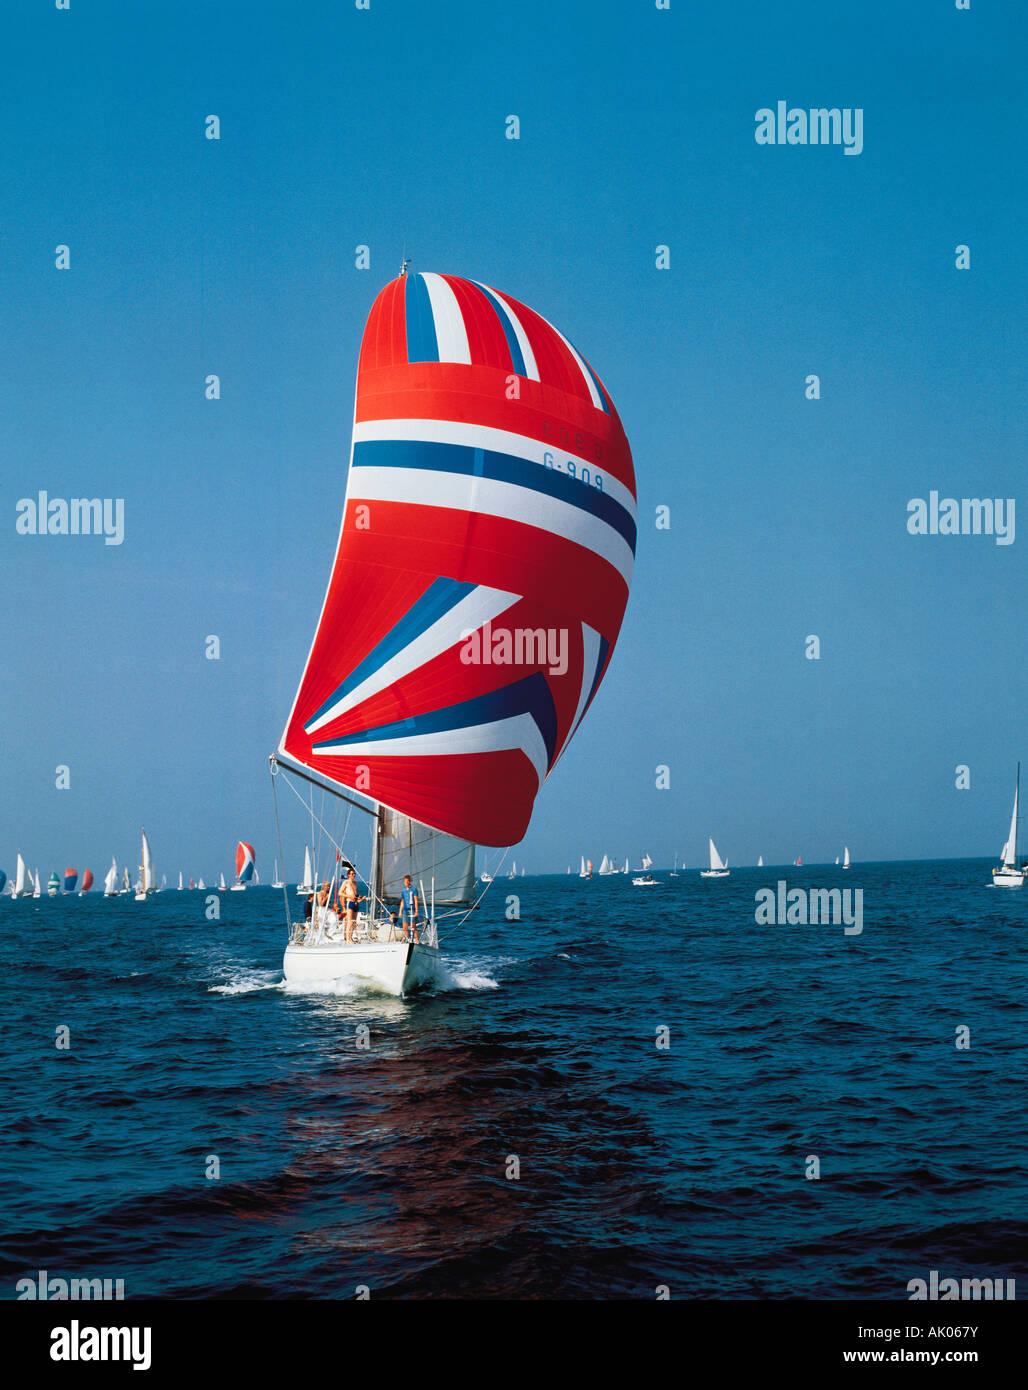 Yacht with spinnaker sail. Stock Photo